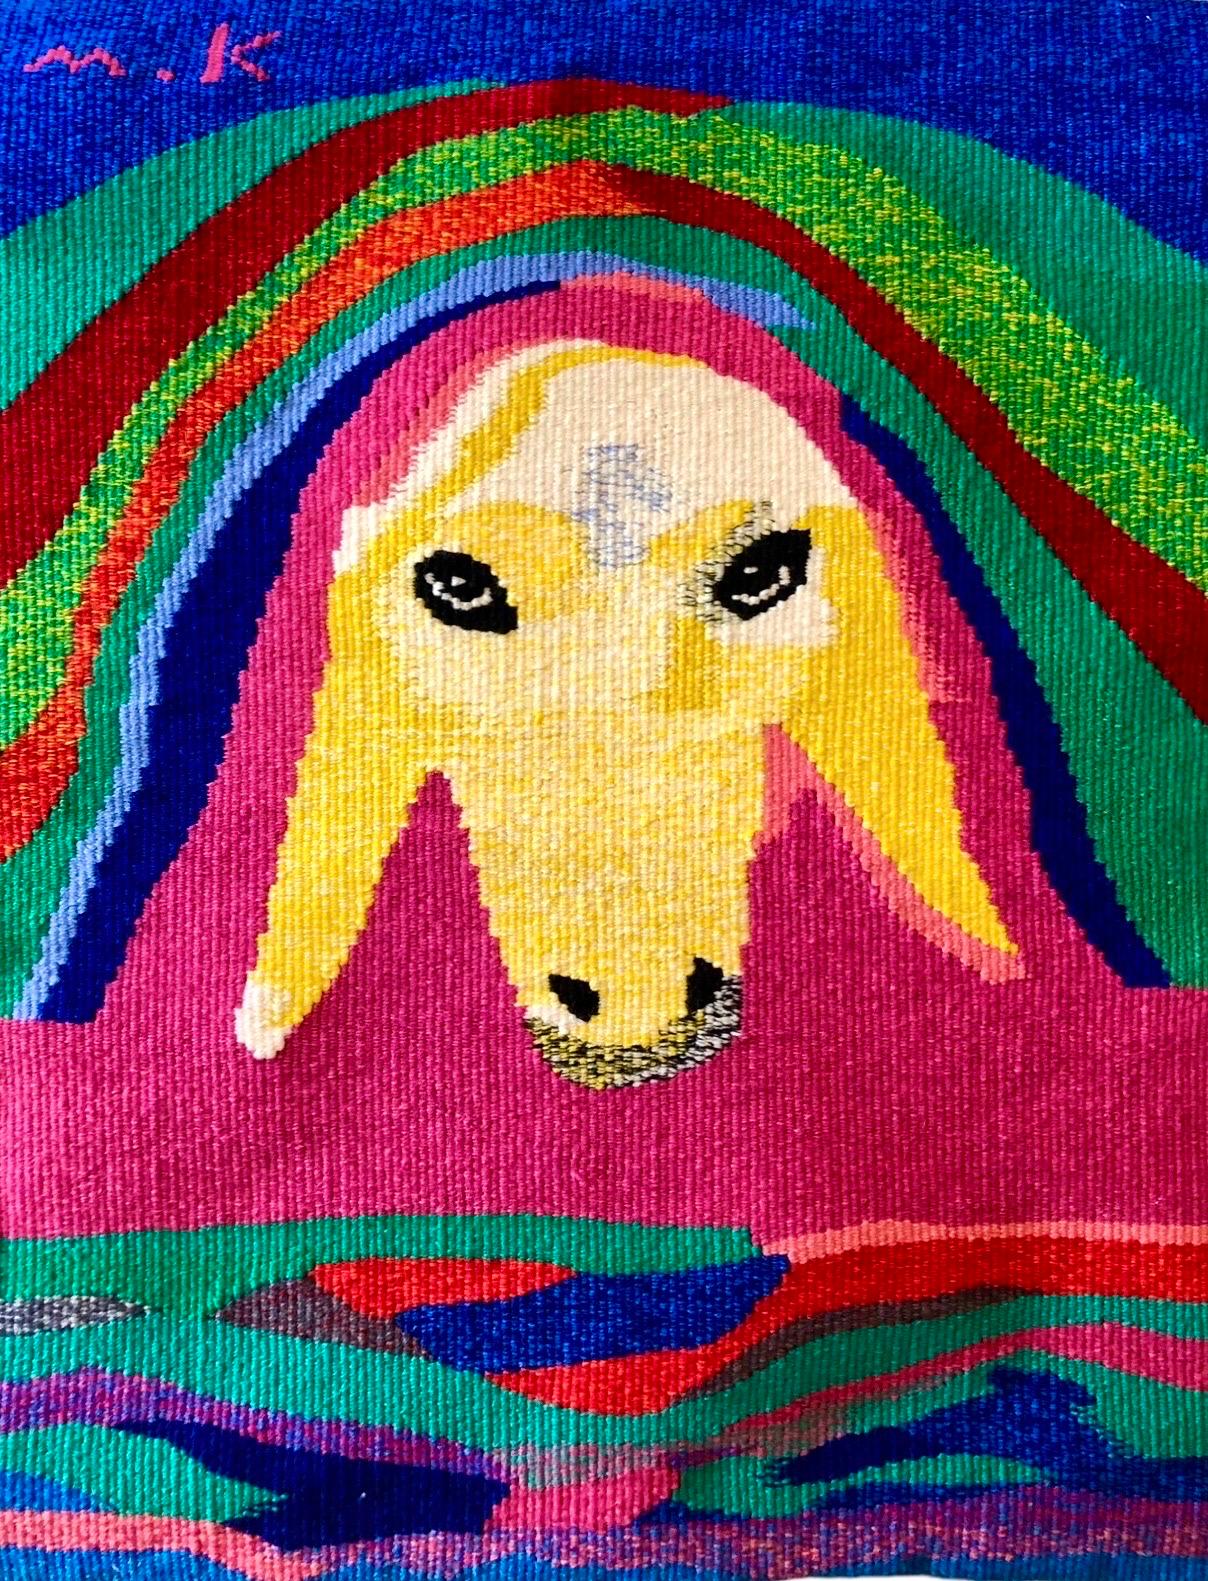 Beautiful hand woven tapestry by renowned Israeli sculptor Menashe Kadishman. Super quality, and visually stunning. 
It measures about 32.5 X 27.5 inches
It is signed with initials.

This is similar to an Aubusson style flat weave hand woven wool